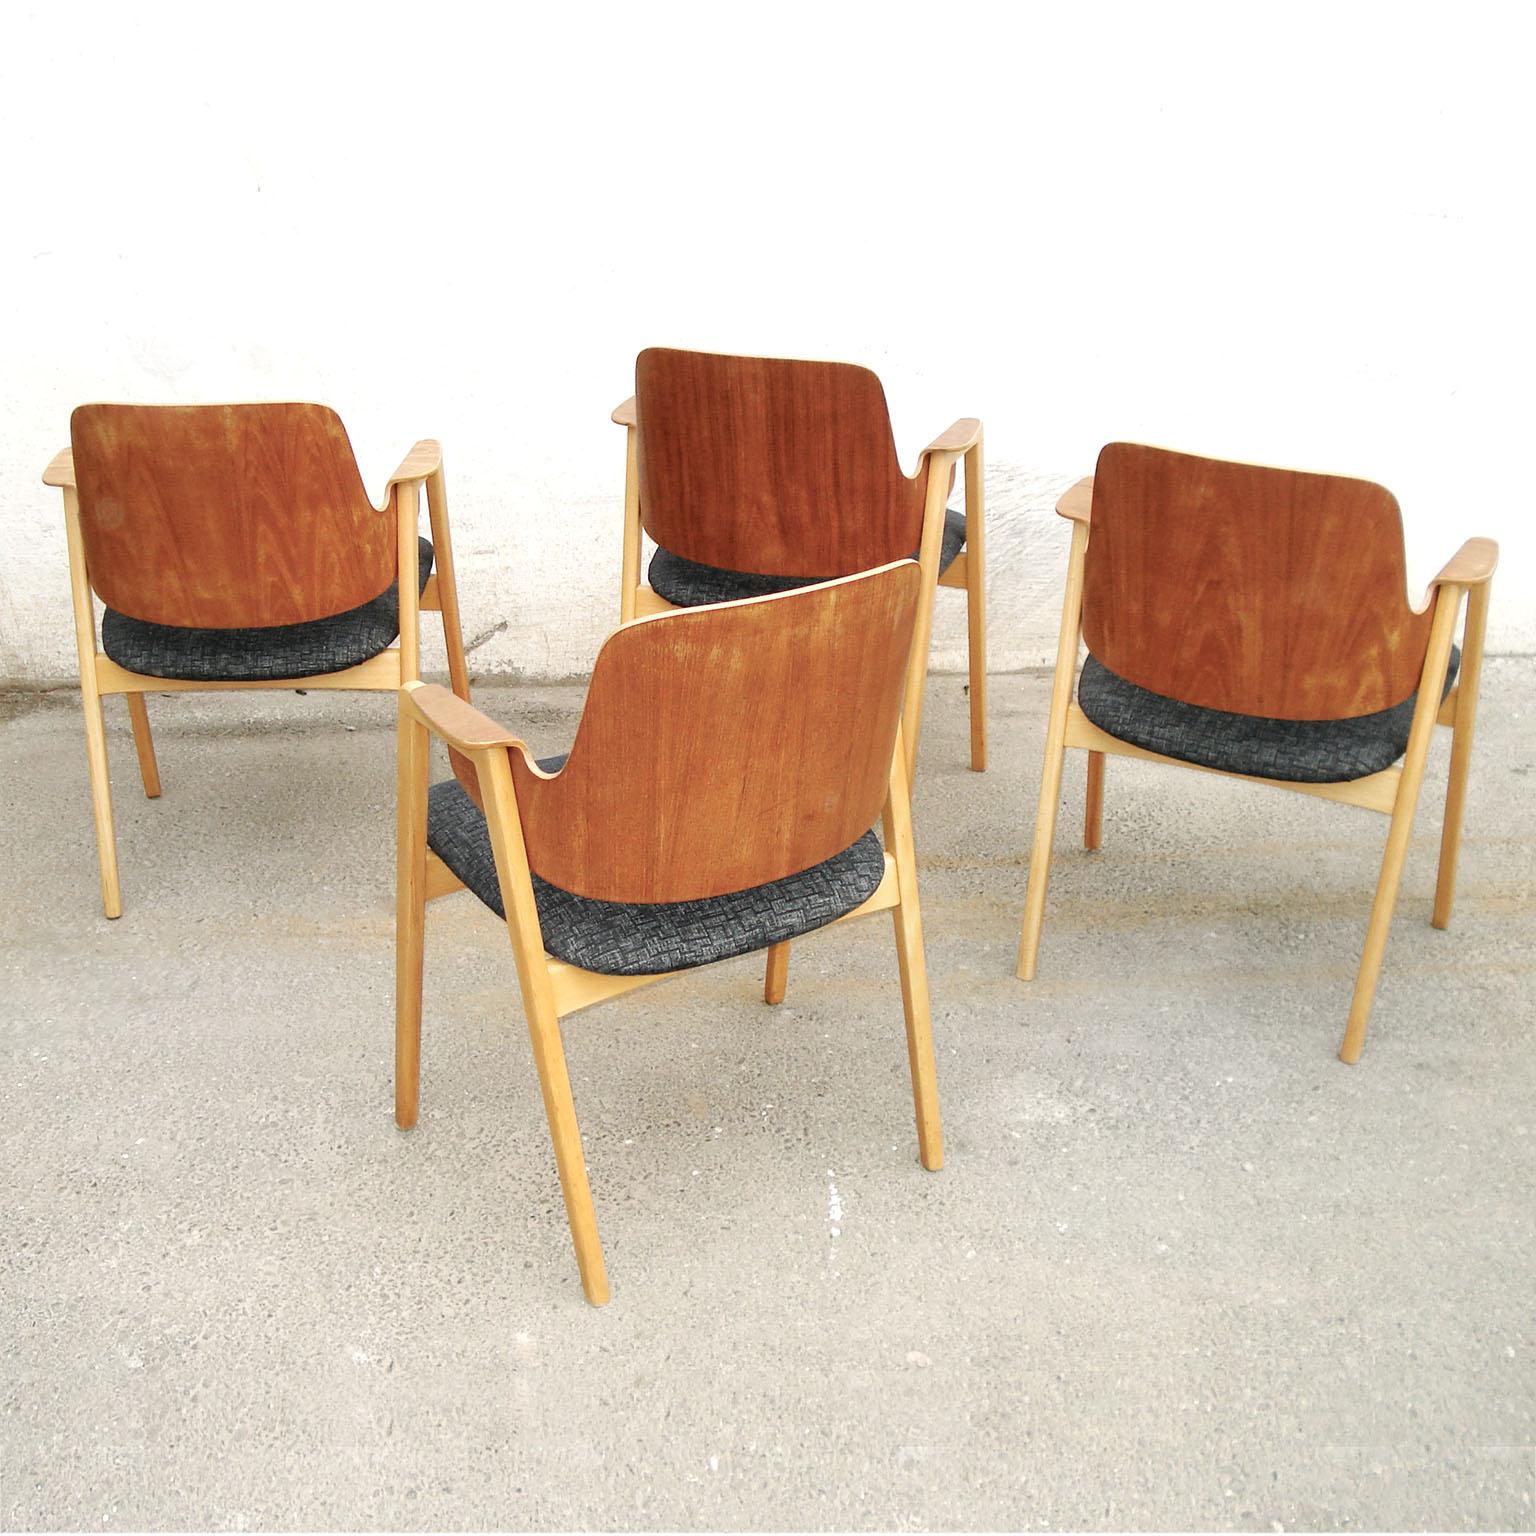 Set of 4 Elias Barup Teak Dining Chairs with Original Upholstery, 1950s Sweden For Sale 1